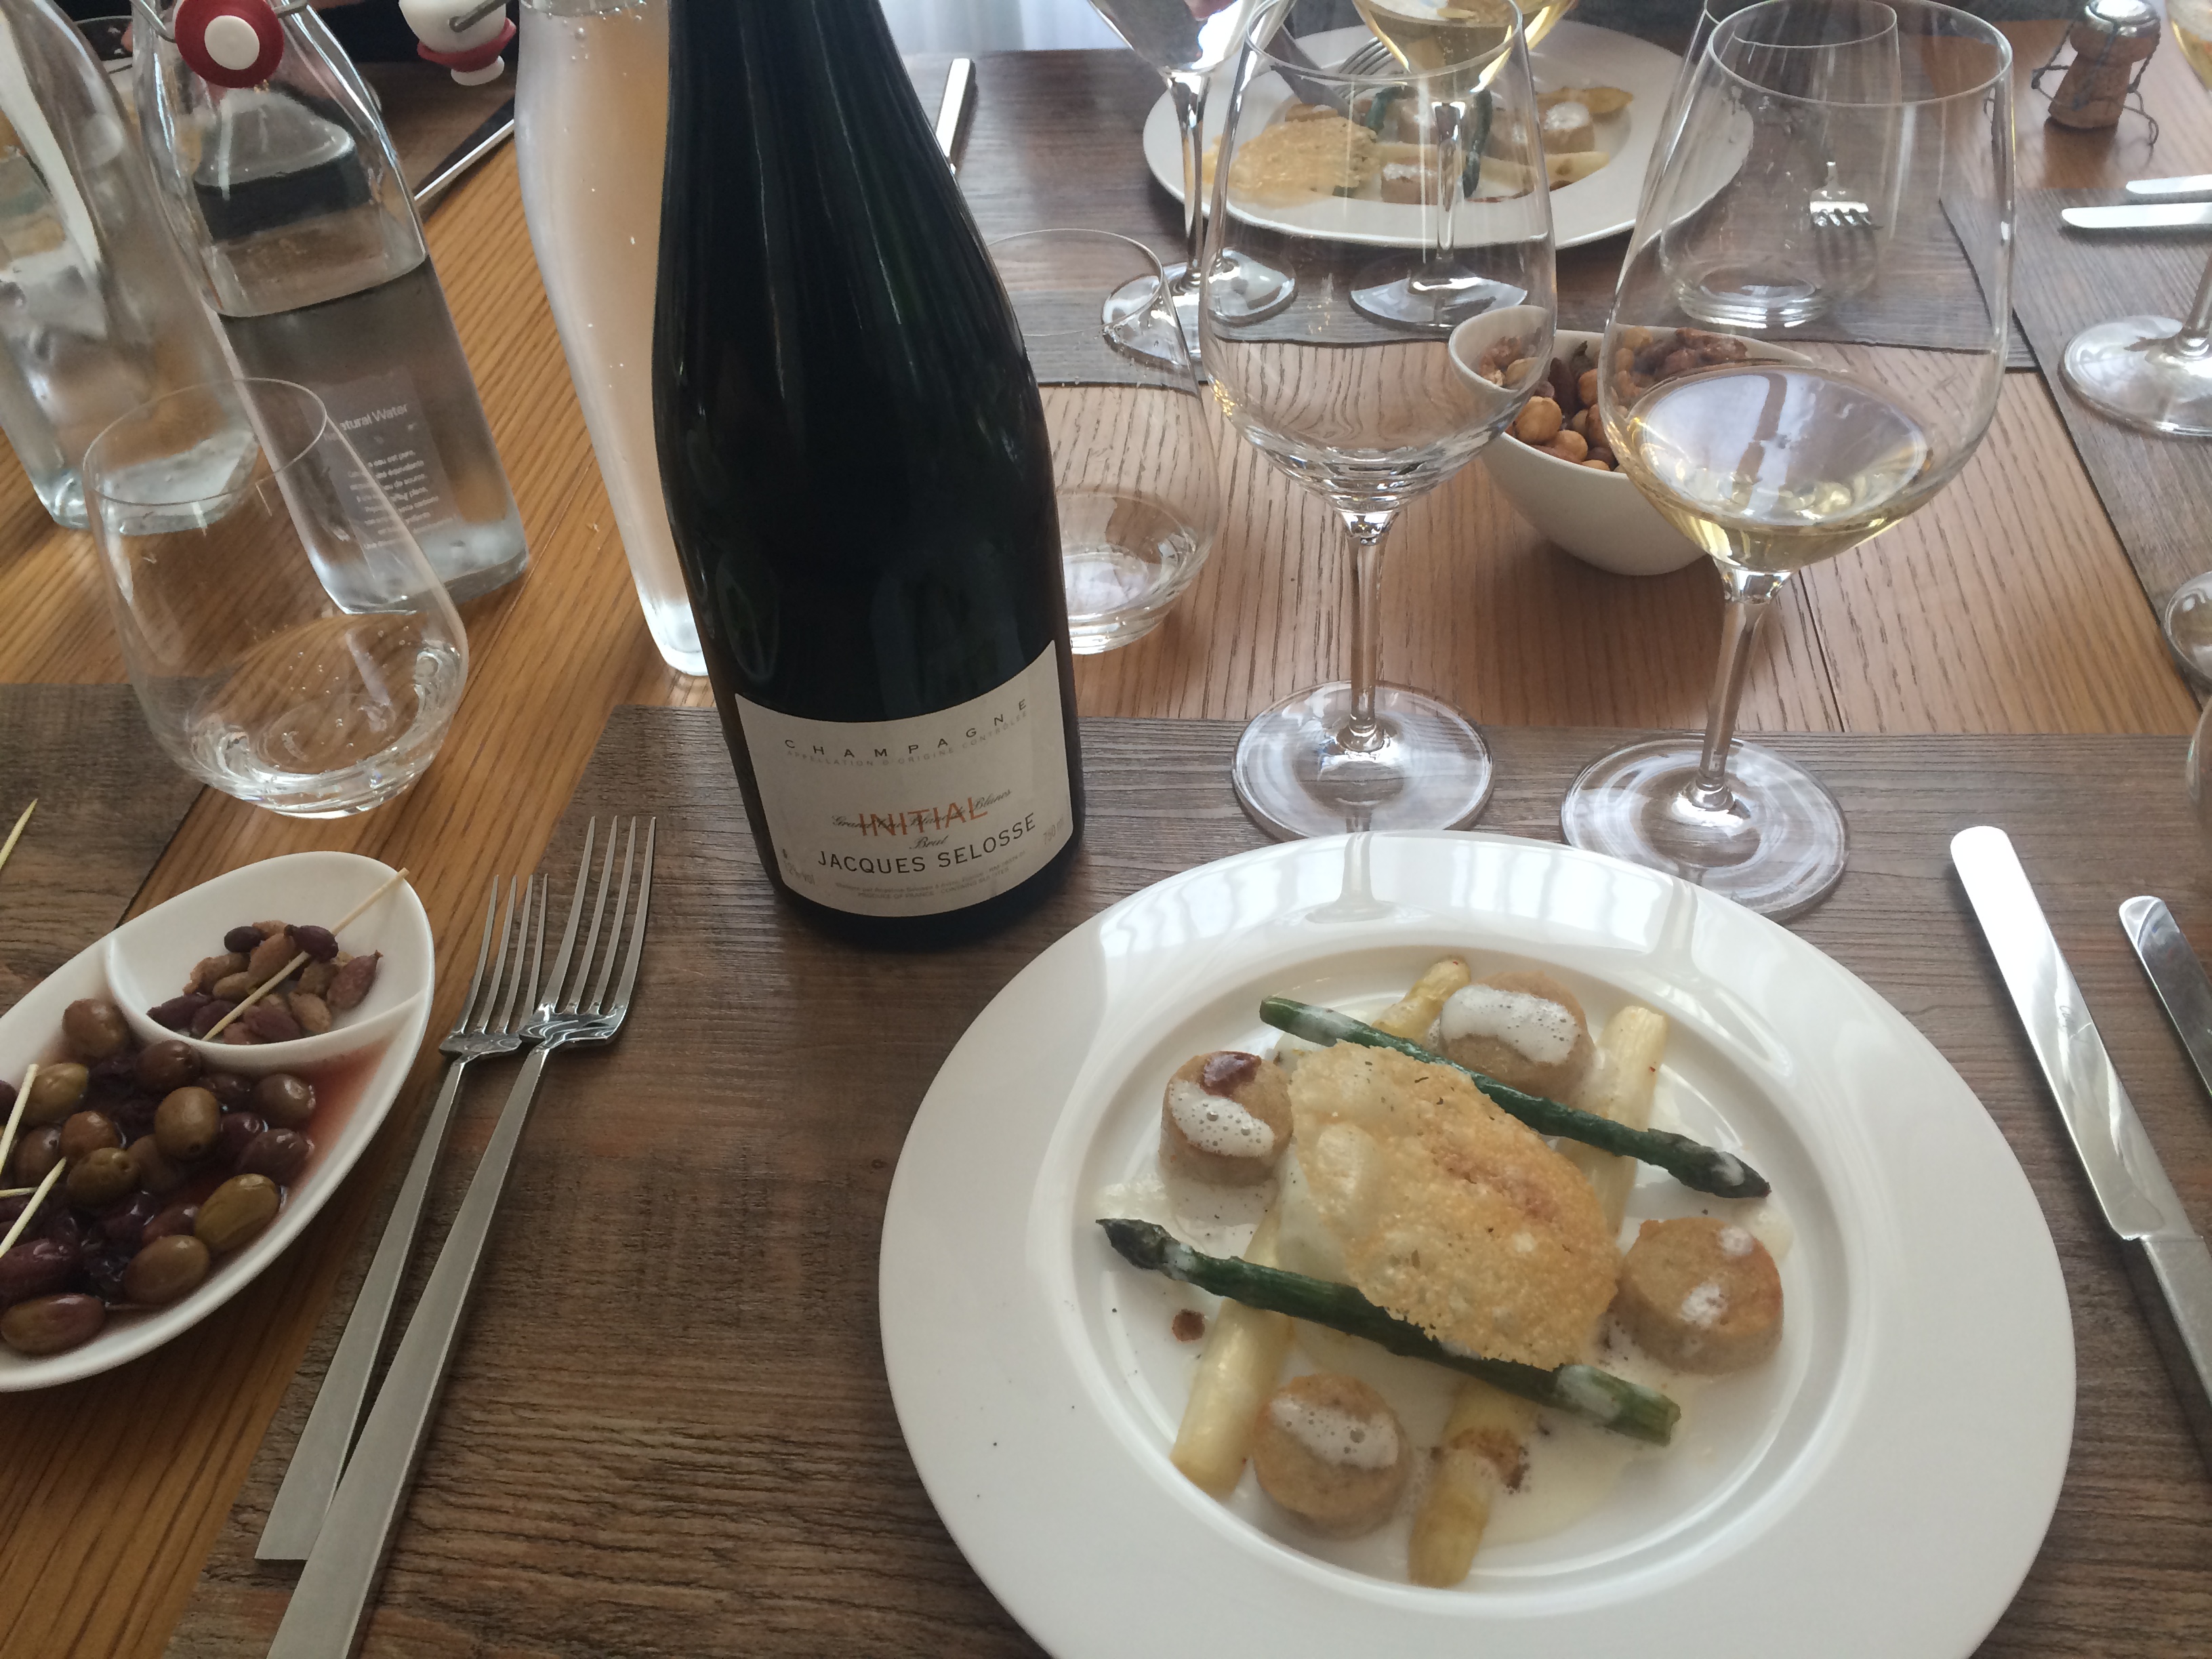 The best (only) way to try Anselme Selosse cult wines? Dine at Restaurant Les Avisés.